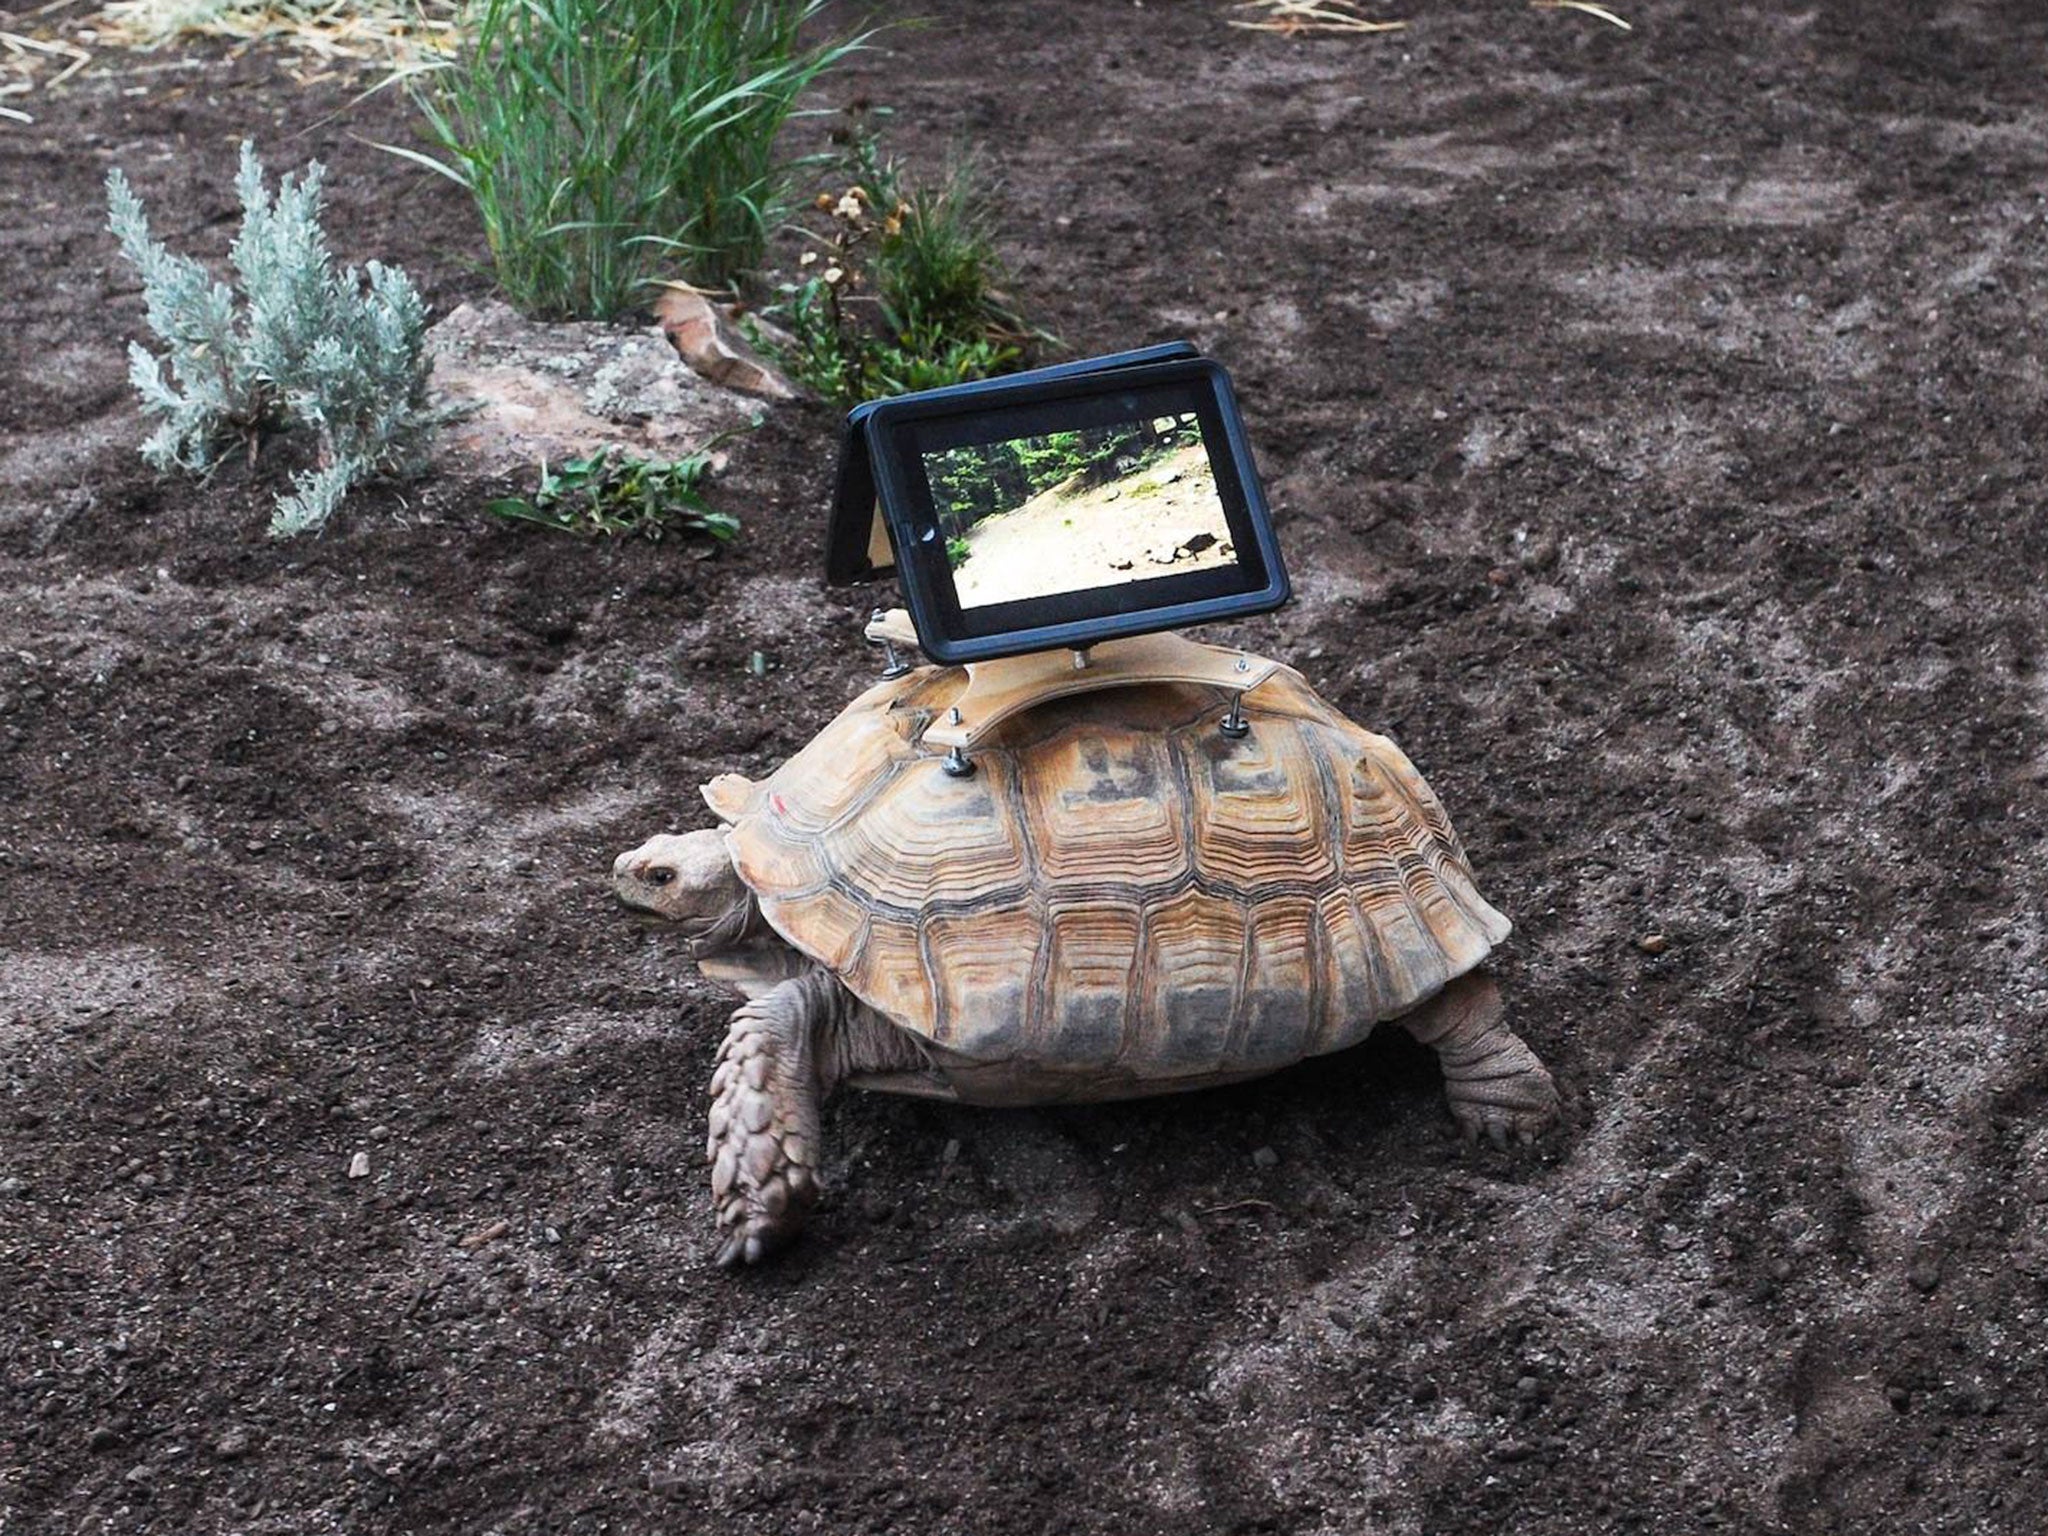 Three tortoises are taking part in an art exhibition with iPads attached to their backs